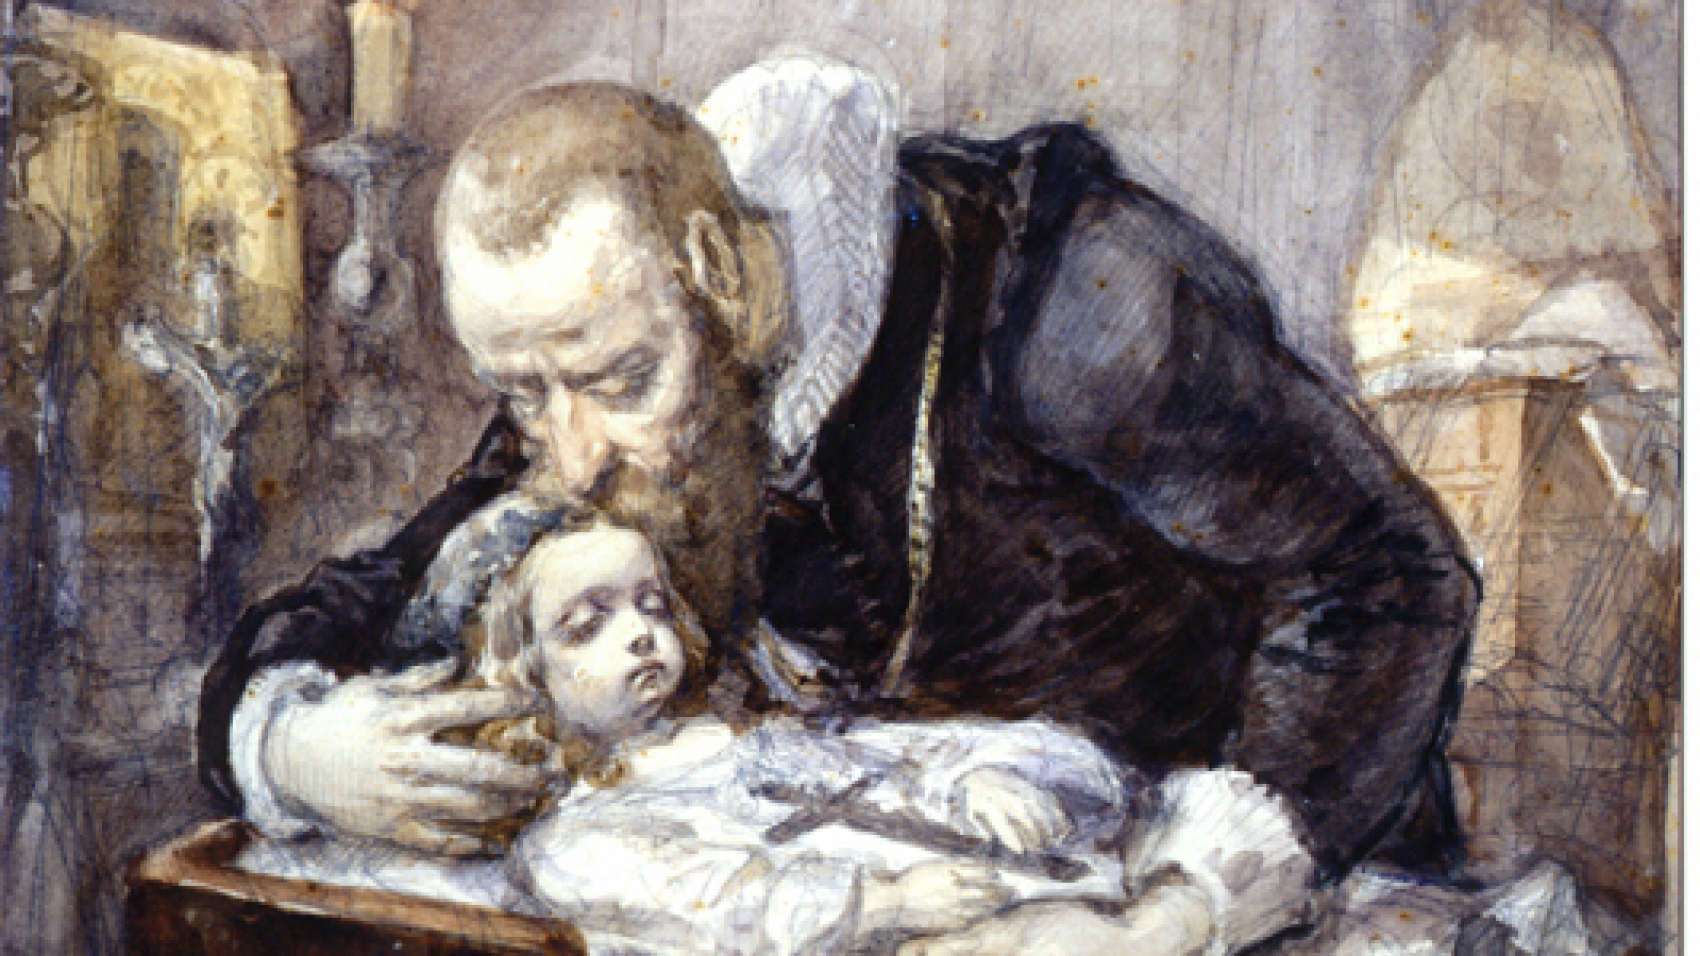 Father and child lament